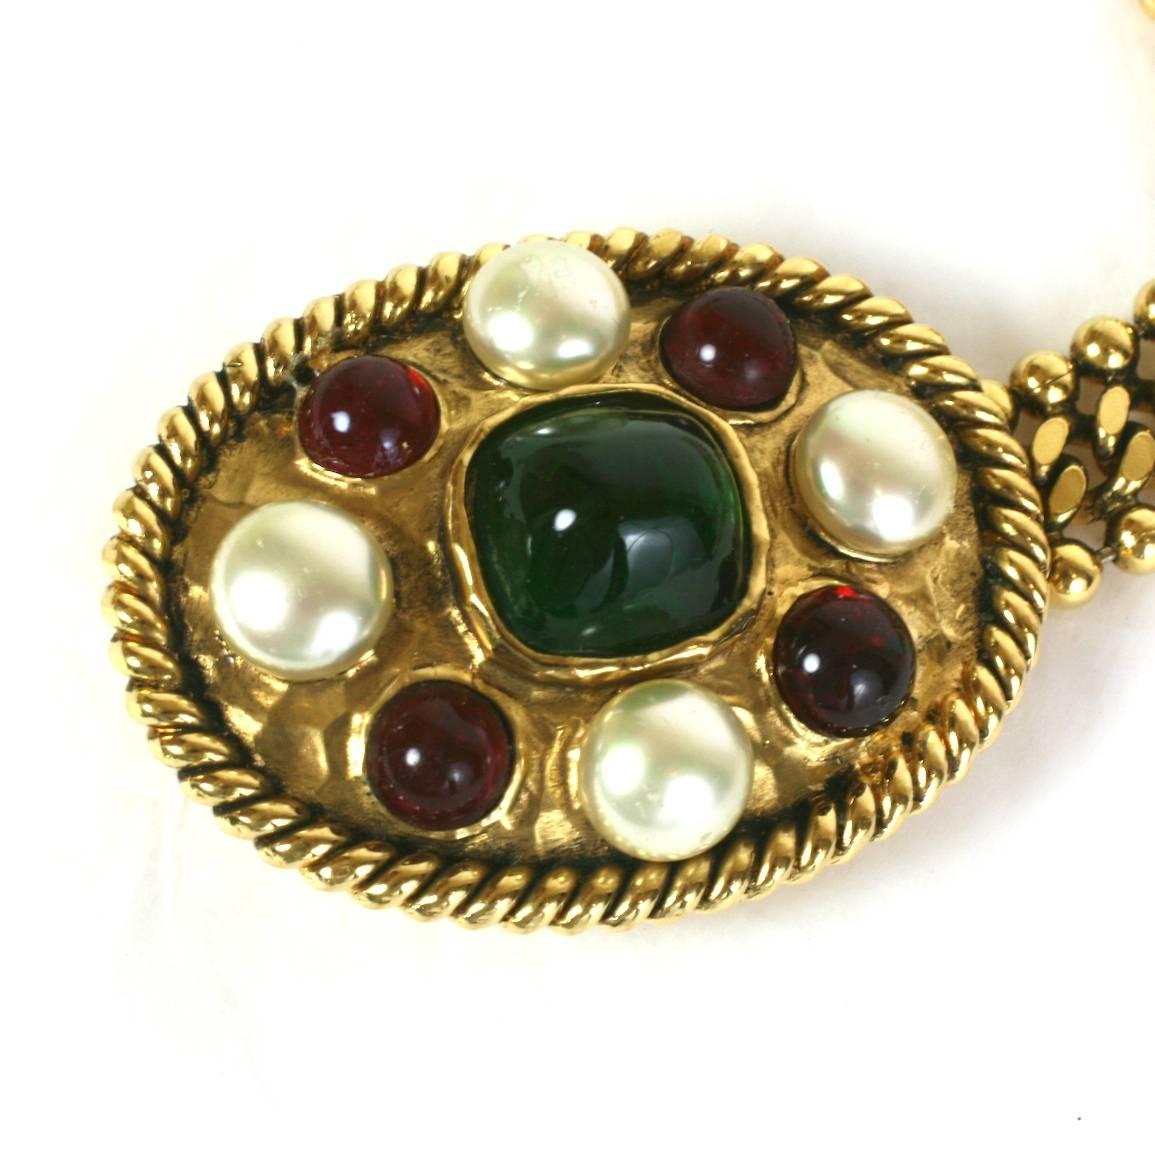 Iconic Chanel Gilt Bronze and Pate de Verre Belt, made by studio Goossens. Ruby and emerald pate de verre cabochons decorate the oval buckle with hand made faux pearls. Adjustable chain link with ruby pate de verre drop. 1980's France. 
Length 33